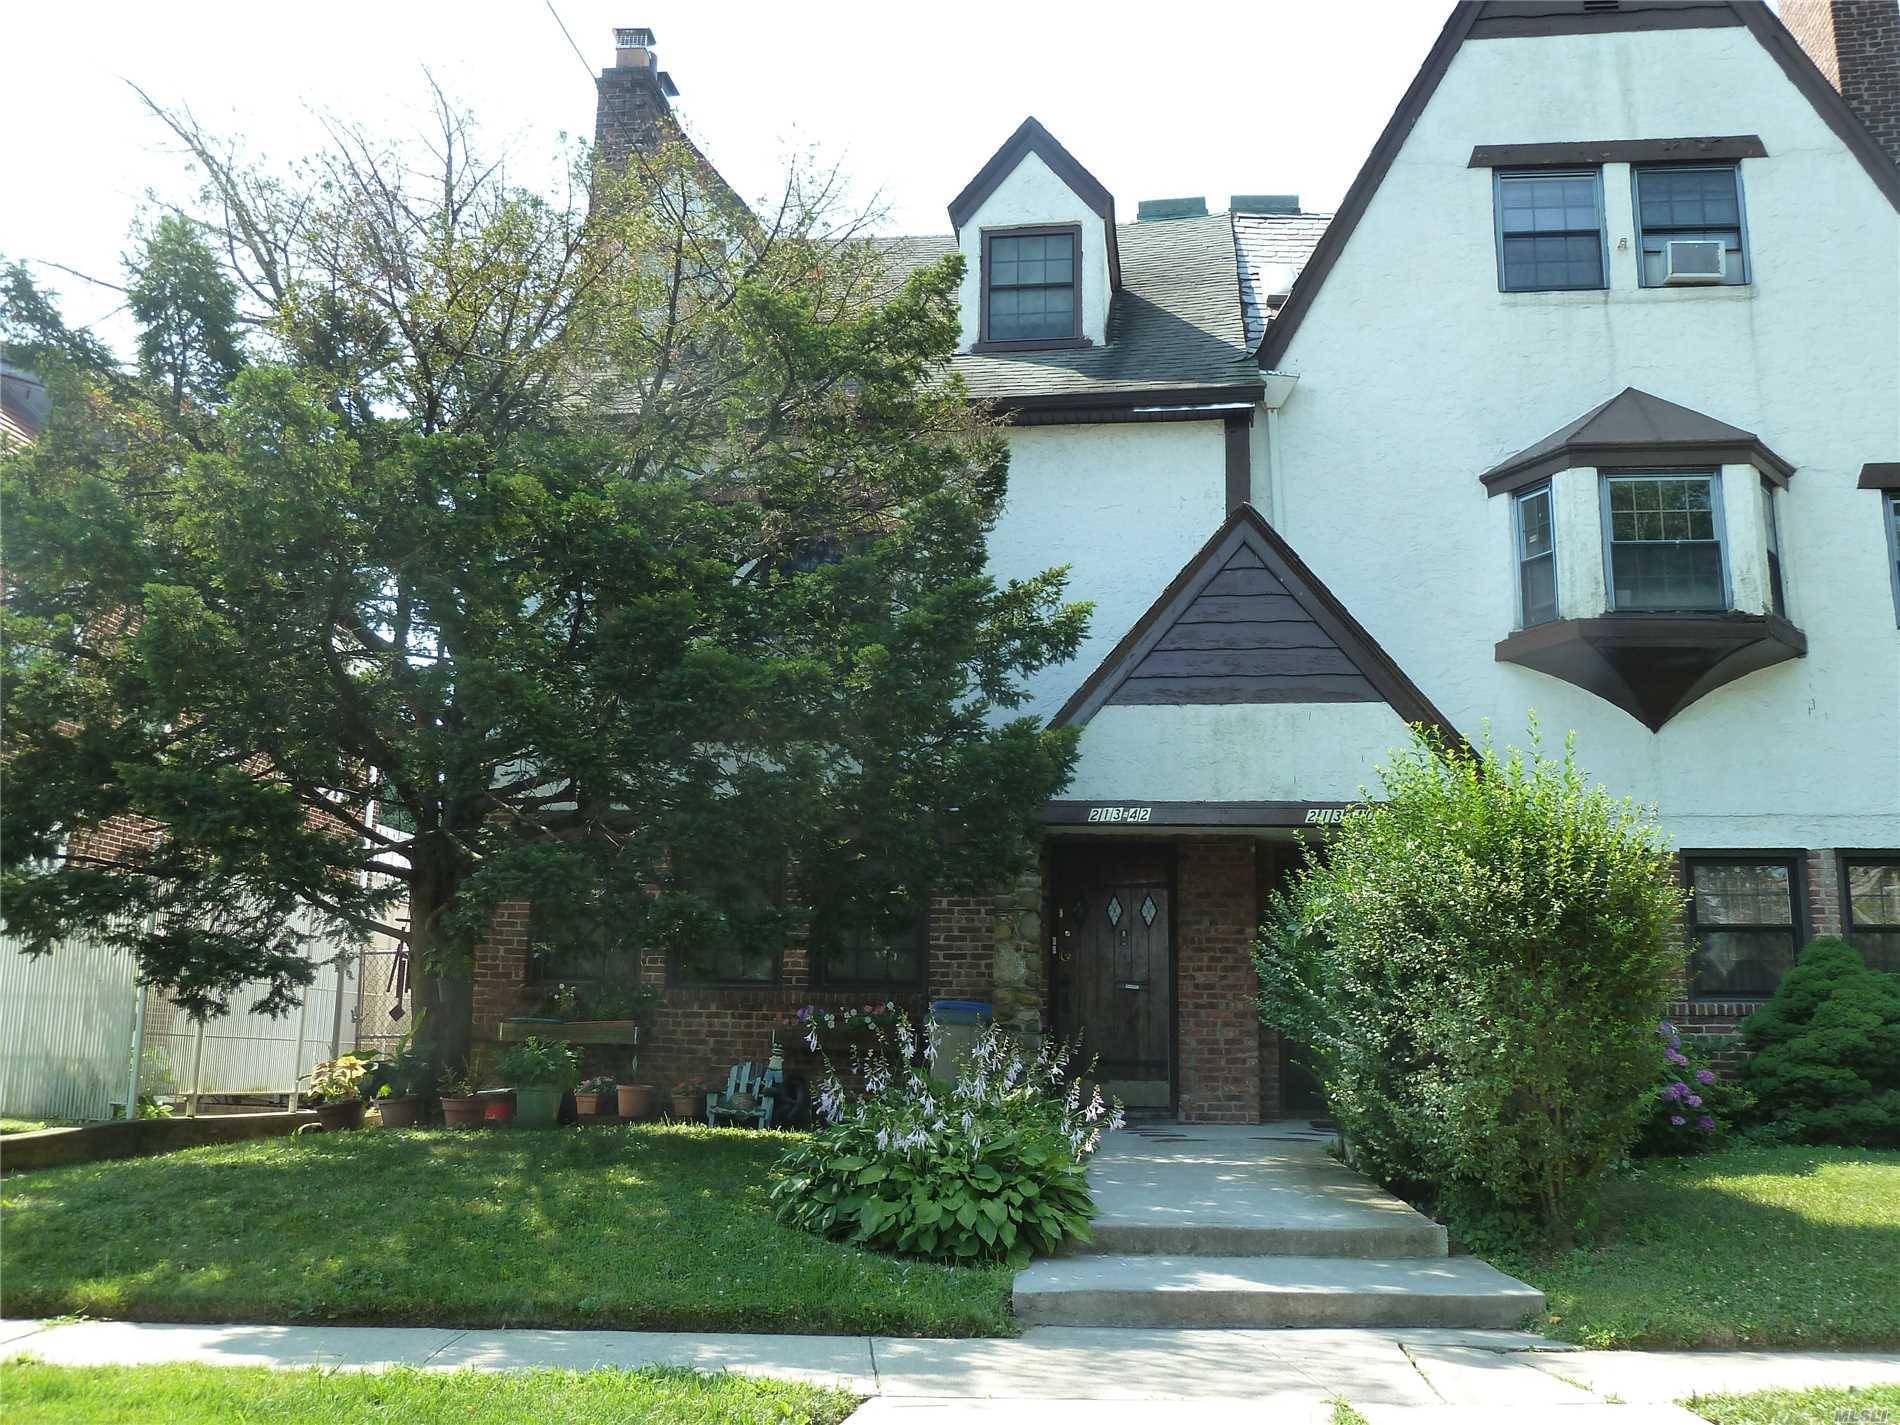 Beautiful 2 Family Tudor House Featuring 3 Bedrooms, 2.